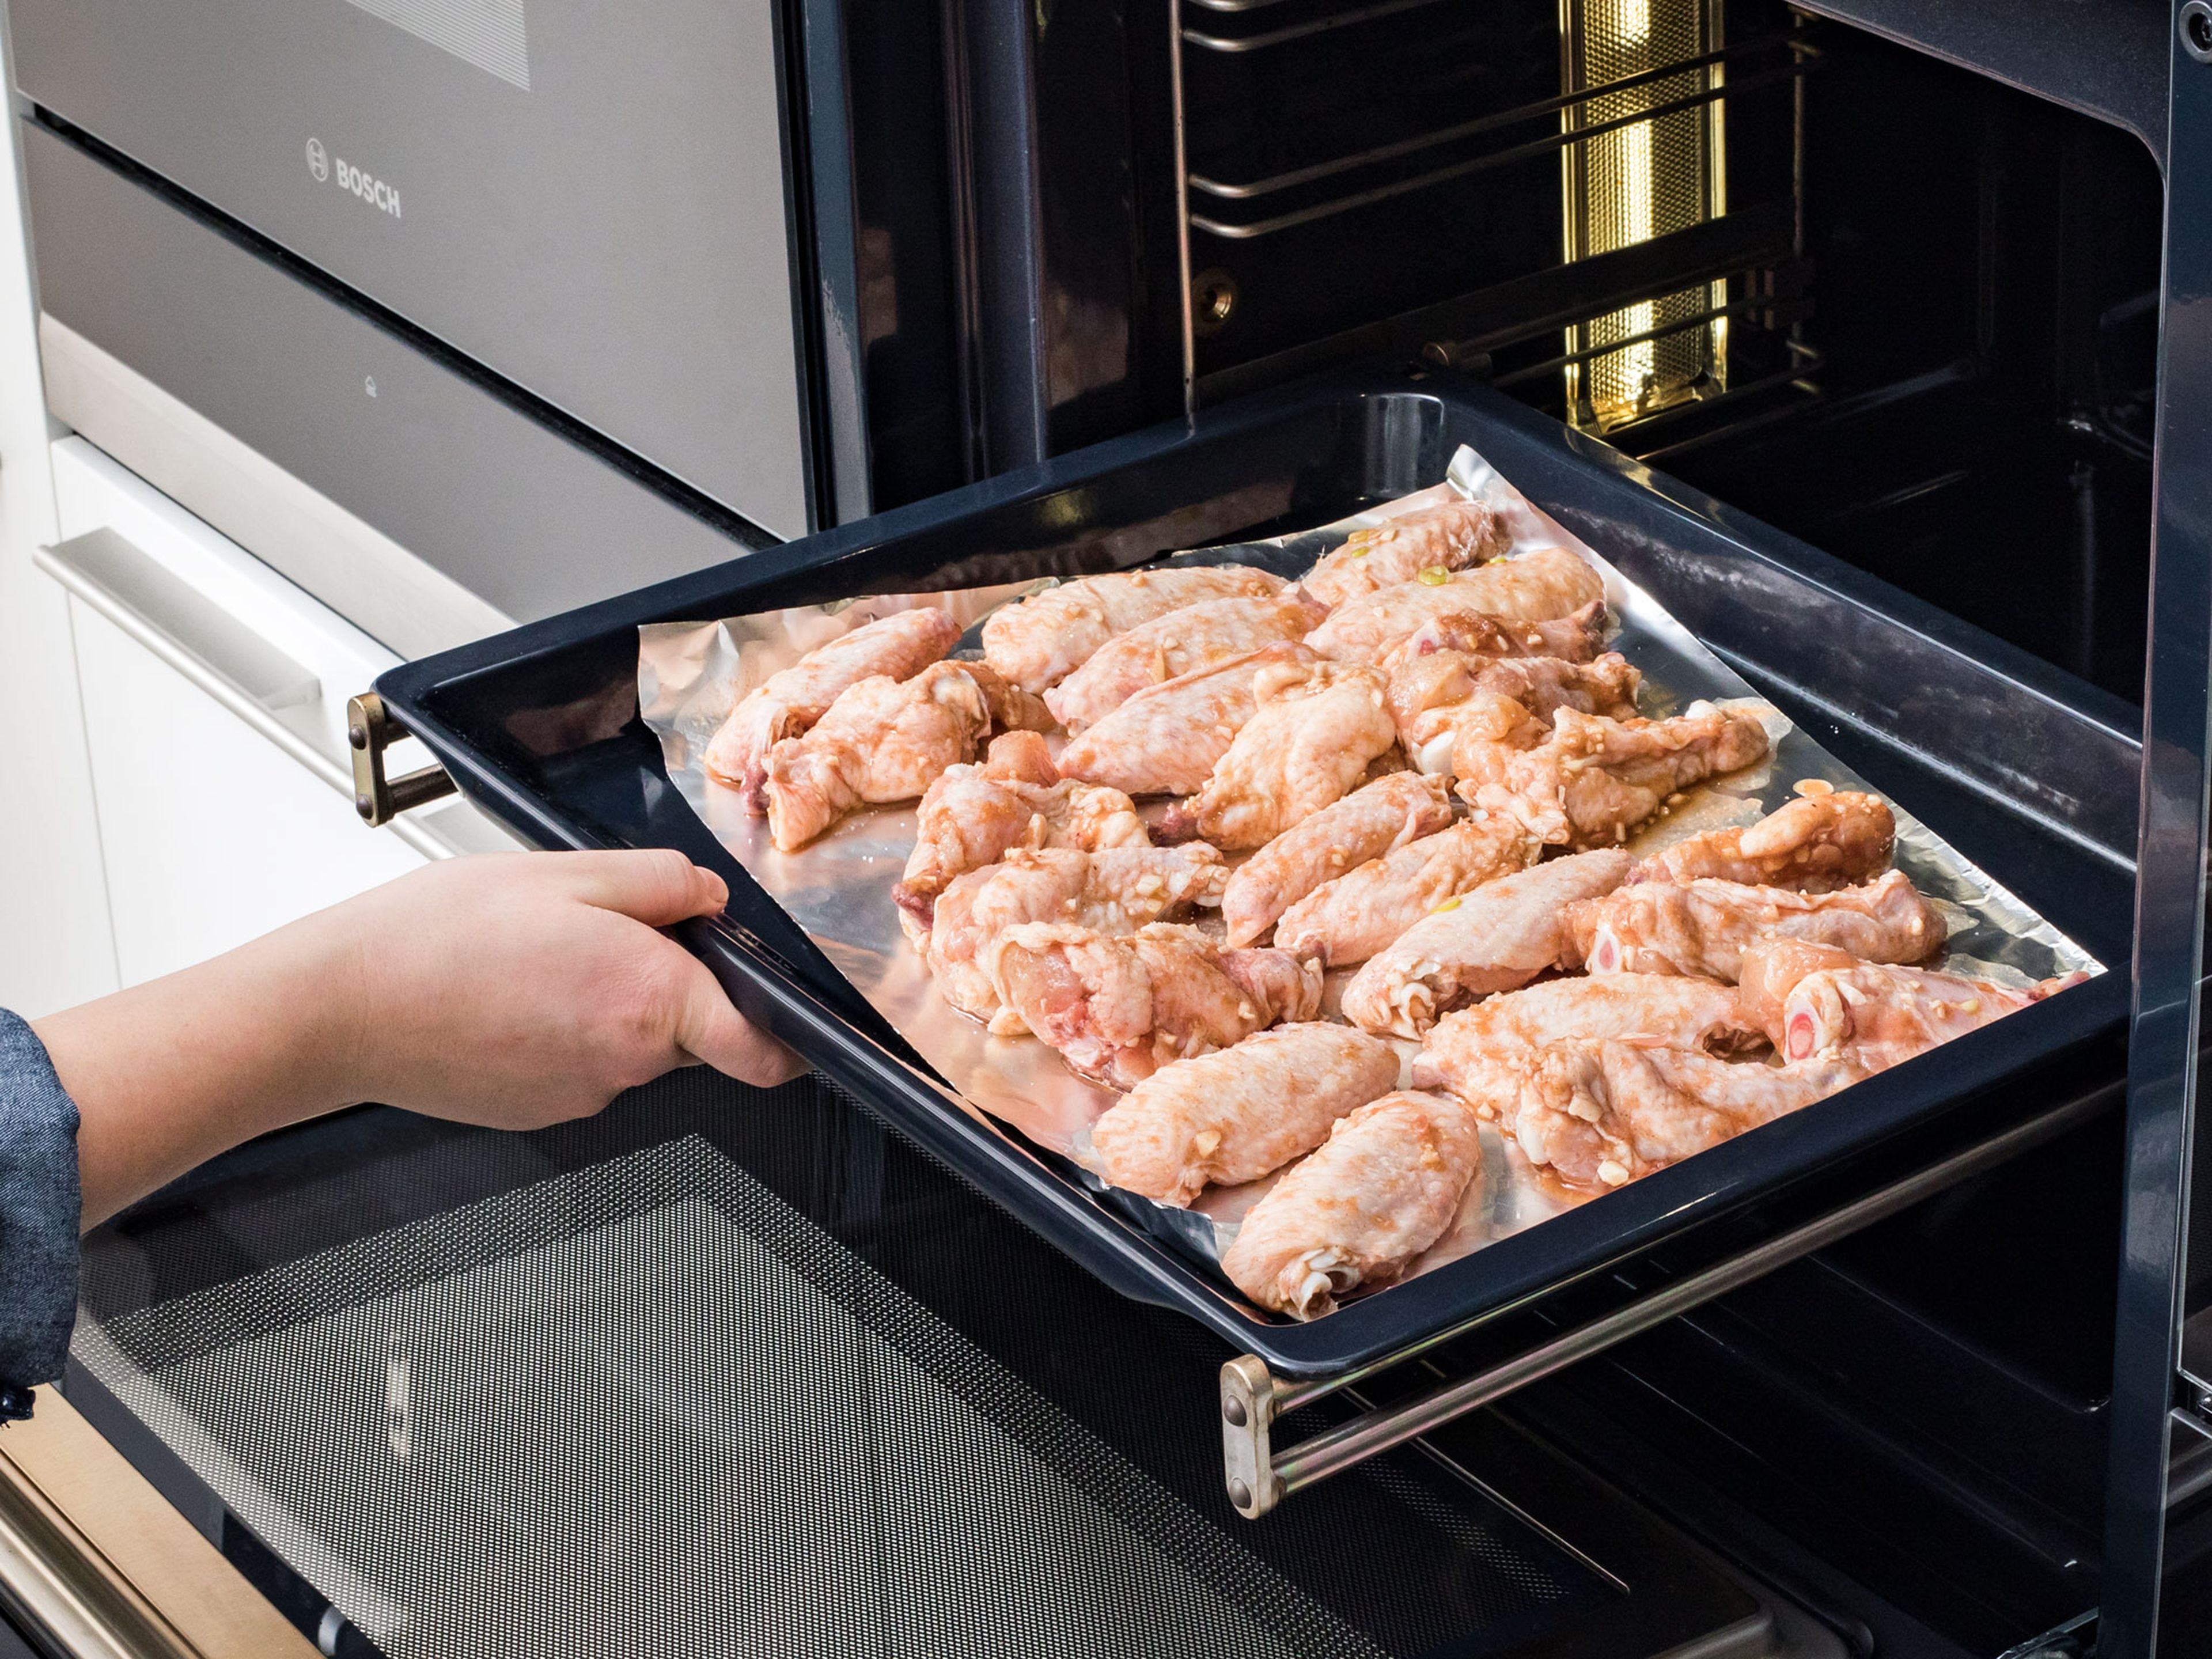 Preheat oven to 220°C/425°F, take out the chicken wings and pat them dry, then season with salt. Place on a baking sheet lined with aluminum foil. Bake for approx. 30 – 40 min.